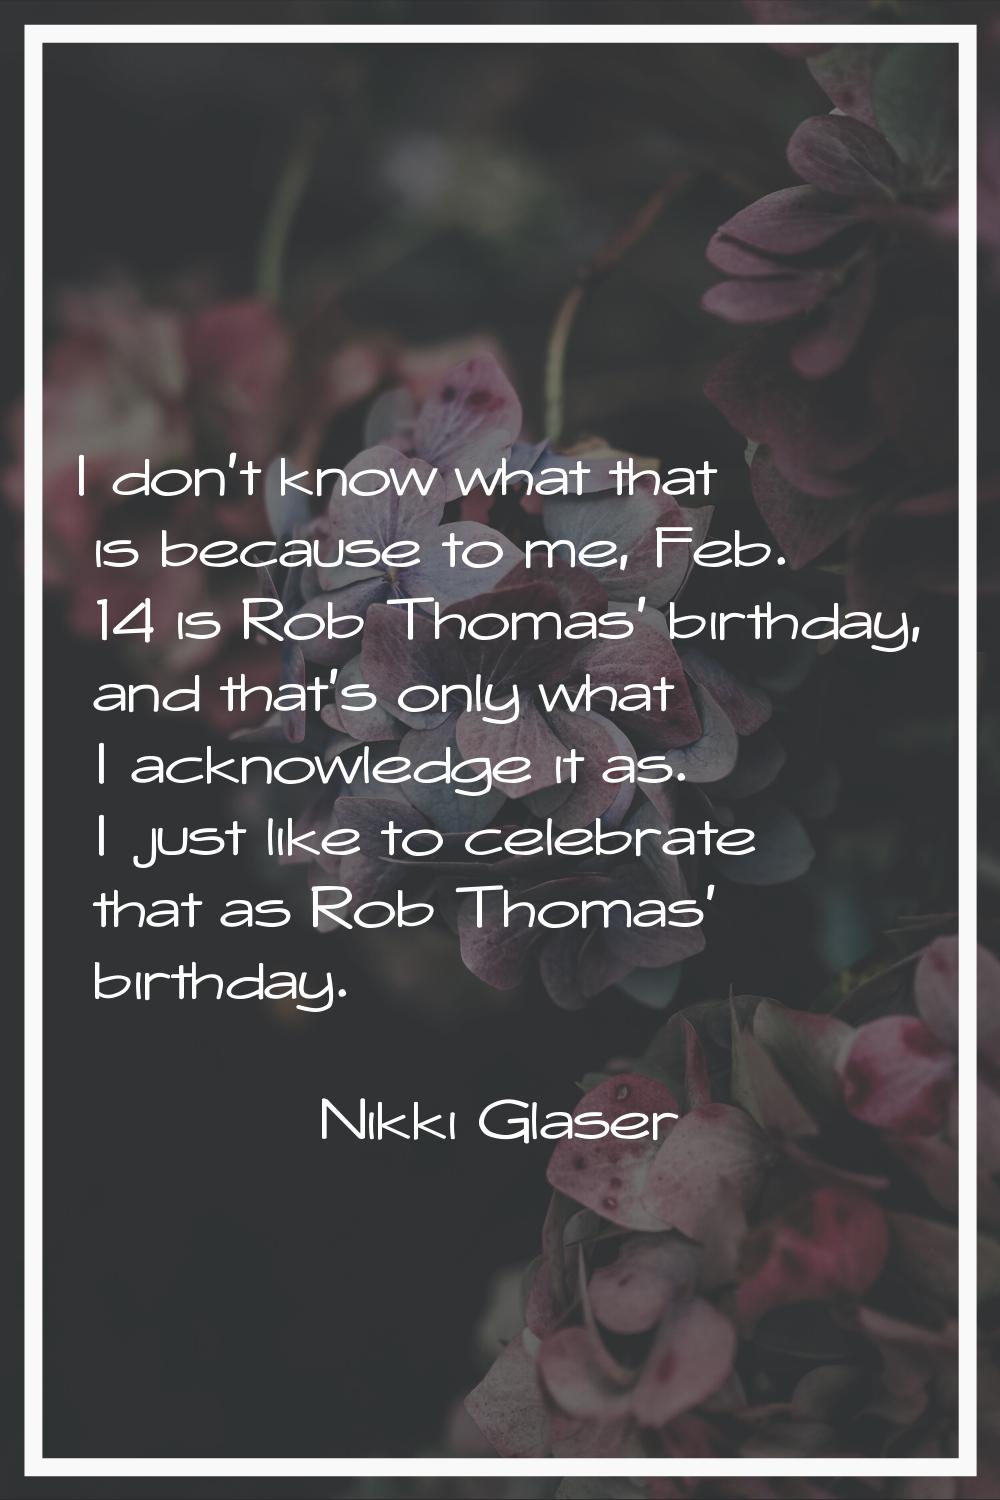 I don't know what that is because to me, Feb. 14 is Rob Thomas' birthday, and that's only what I ac